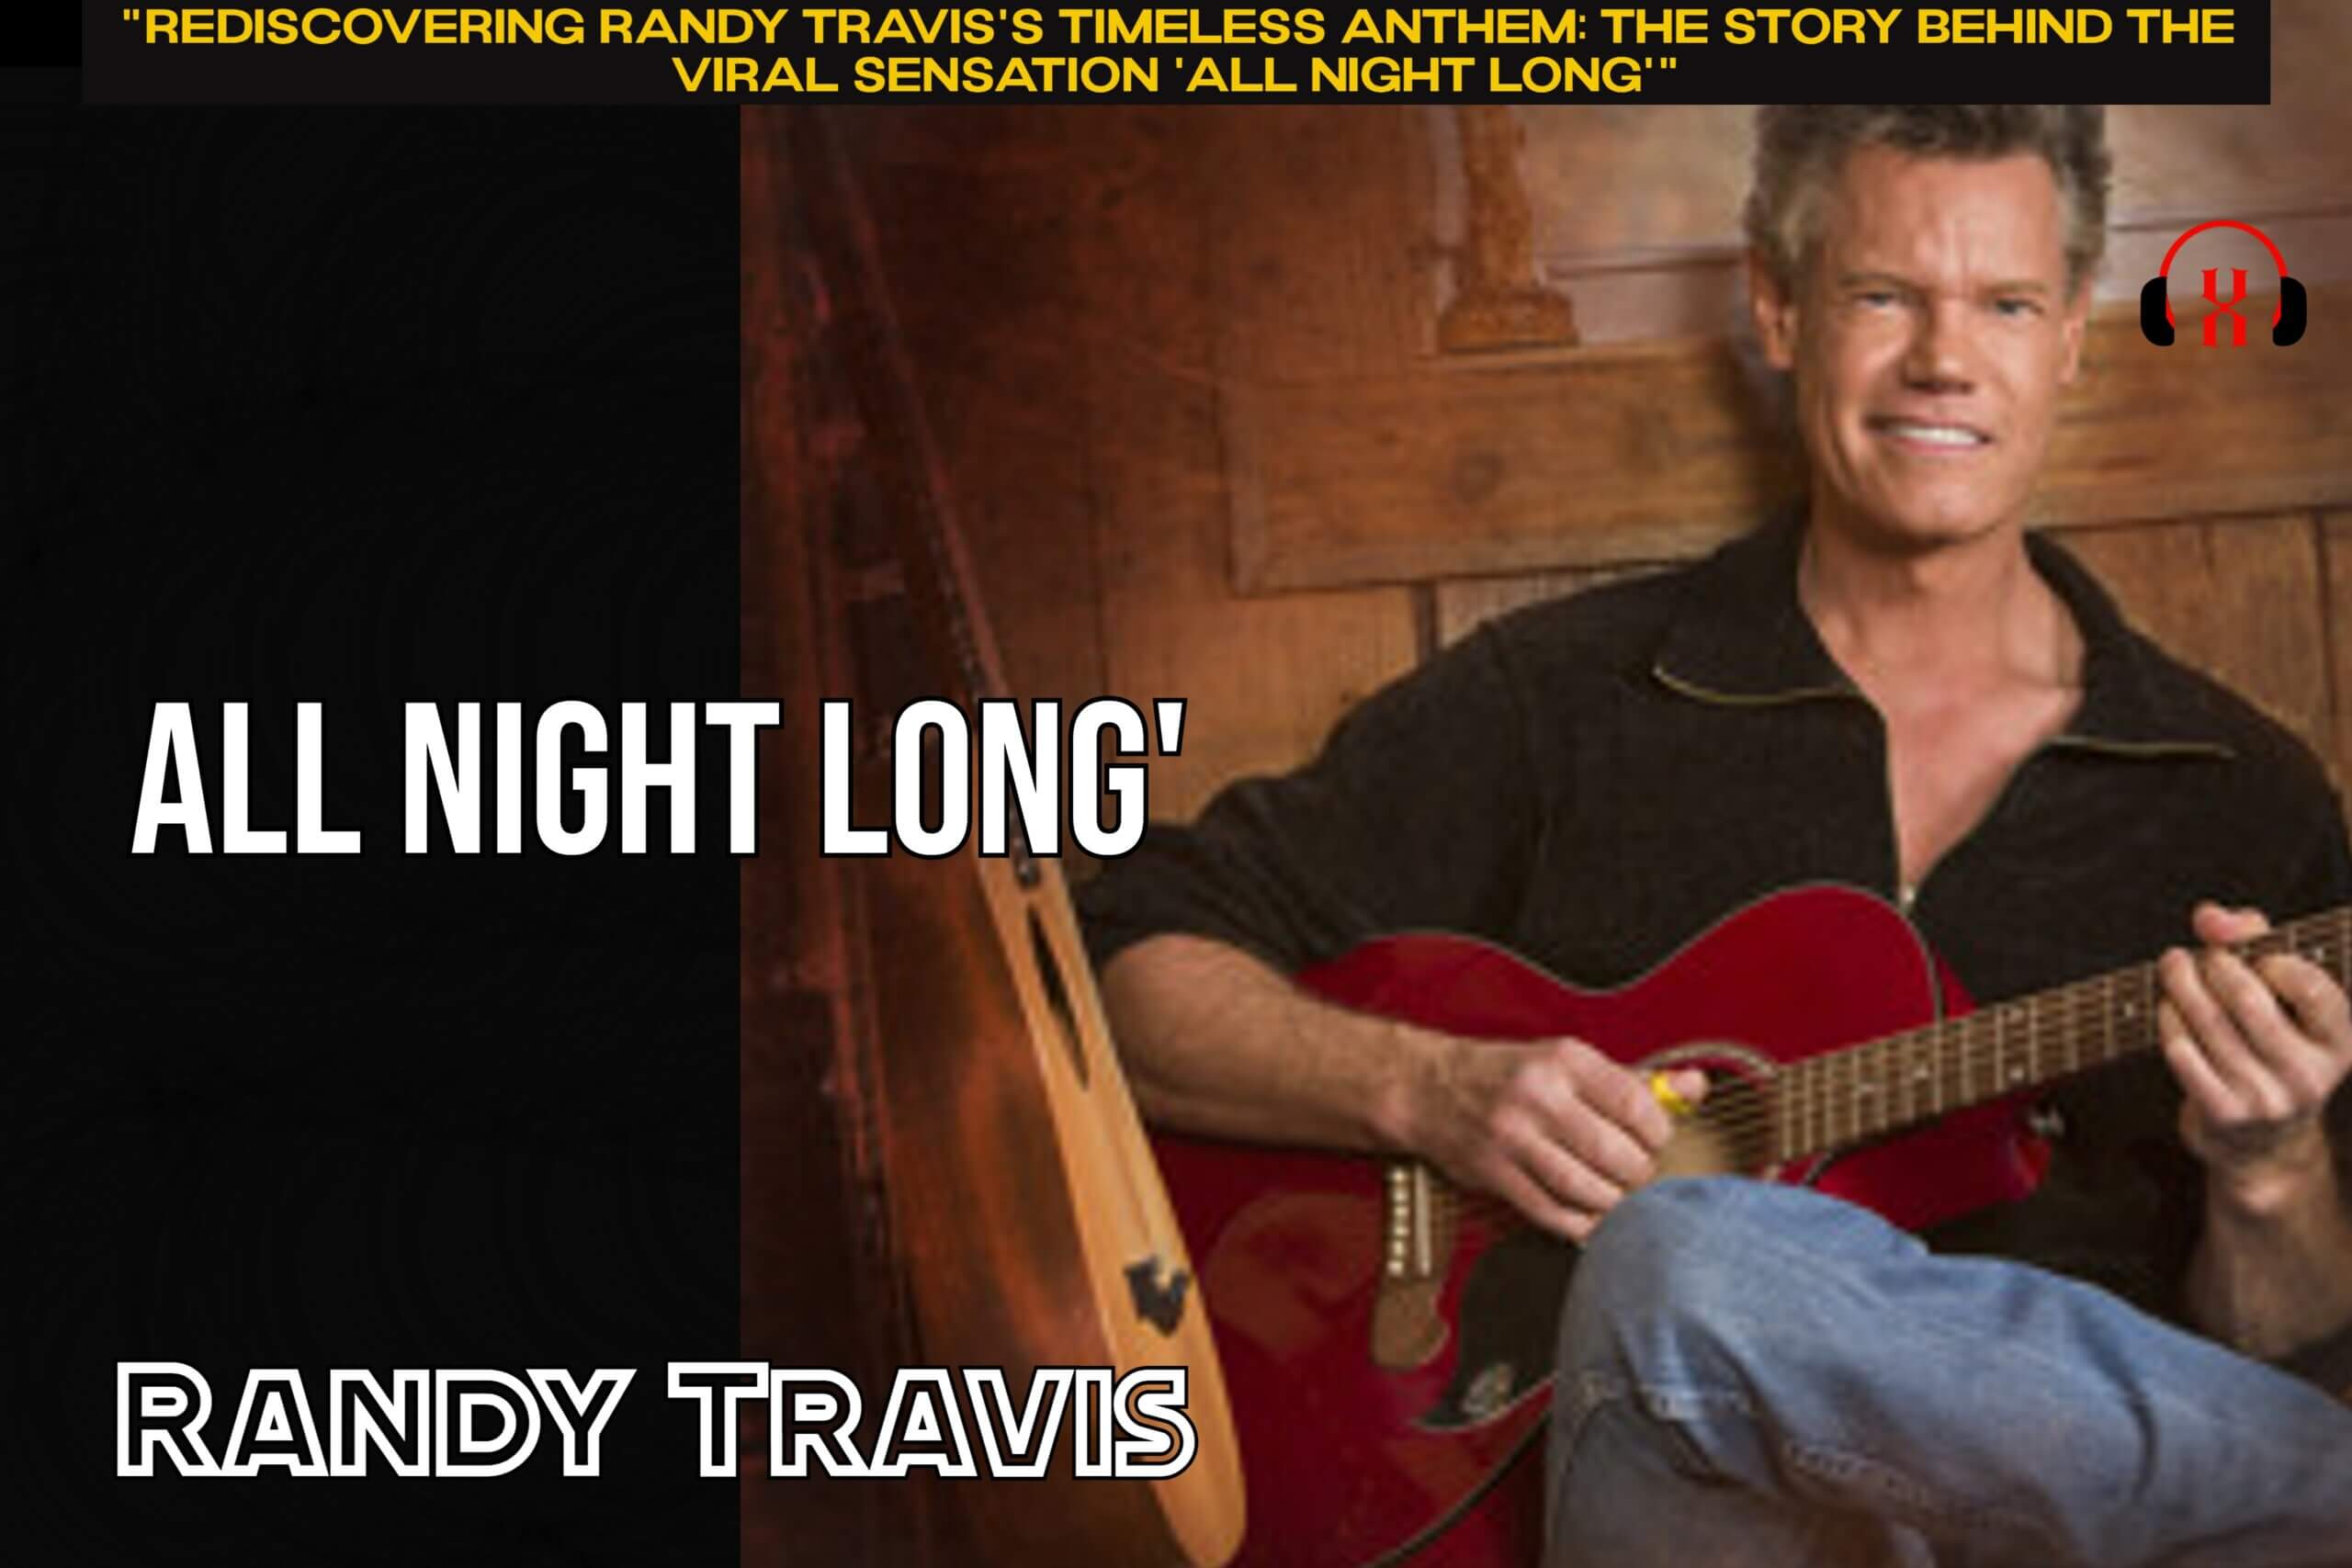 "Rediscovering Randy Travis's Timeless Anthem: The Story Behind the Viral Sensation 'All Night Long'"